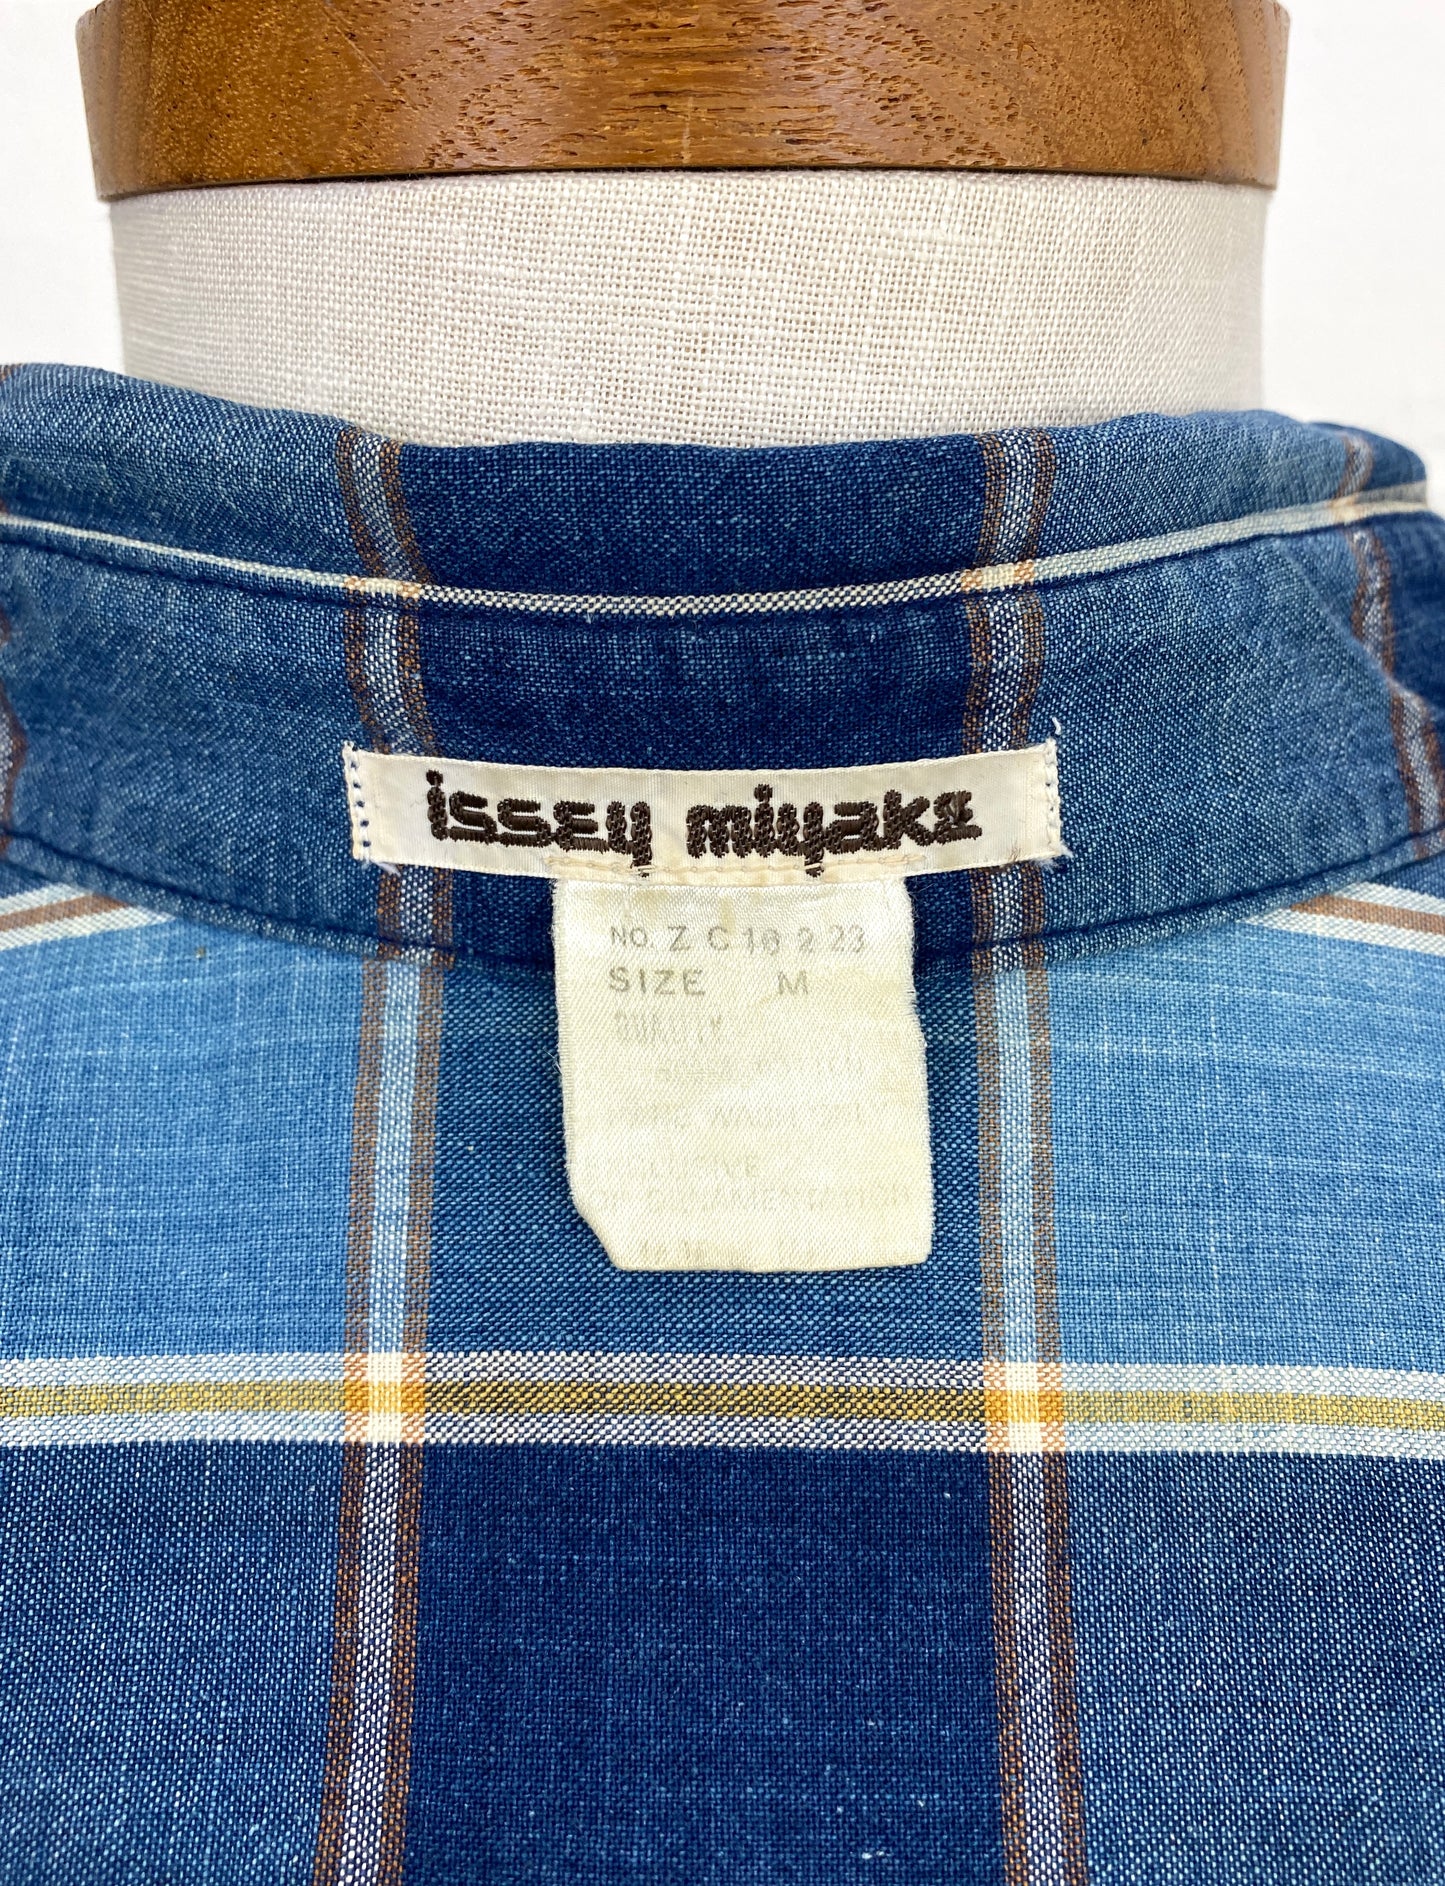 Vintage 1980s Issey Miyake Men's Blue Check Cotton Oversized Button-Up Shirt